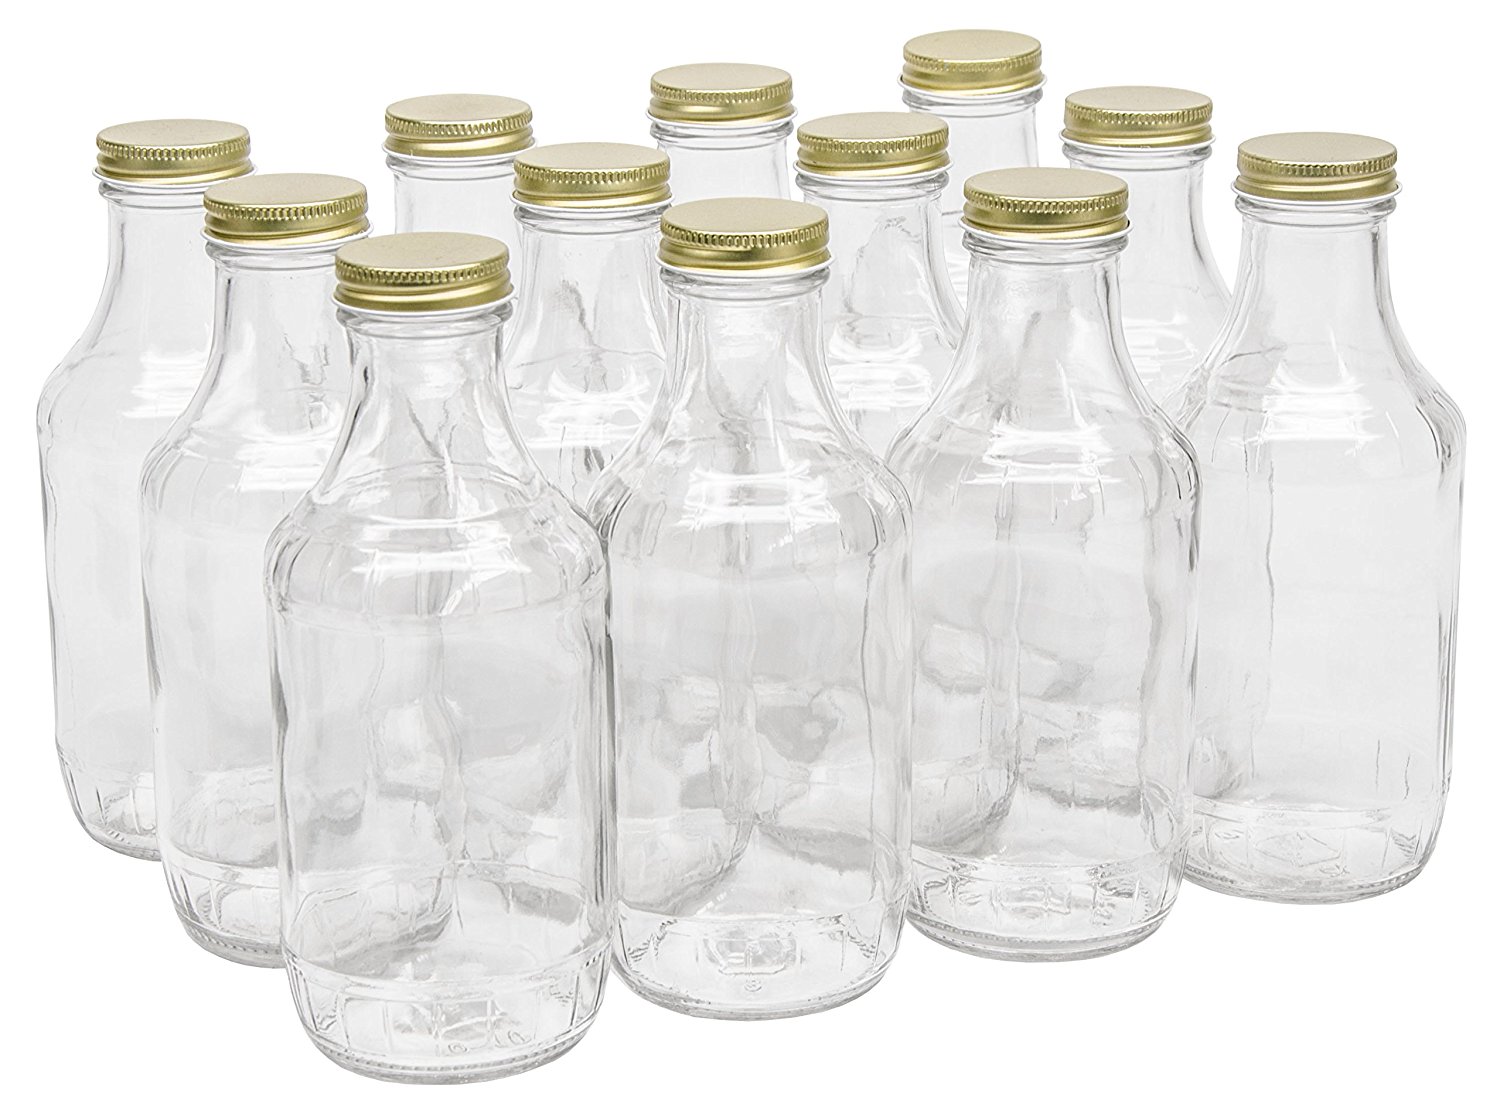 NMS 16 Ounce Glass Stout Sauce Bottle - Case of 12 - With 38mm Gold Lids